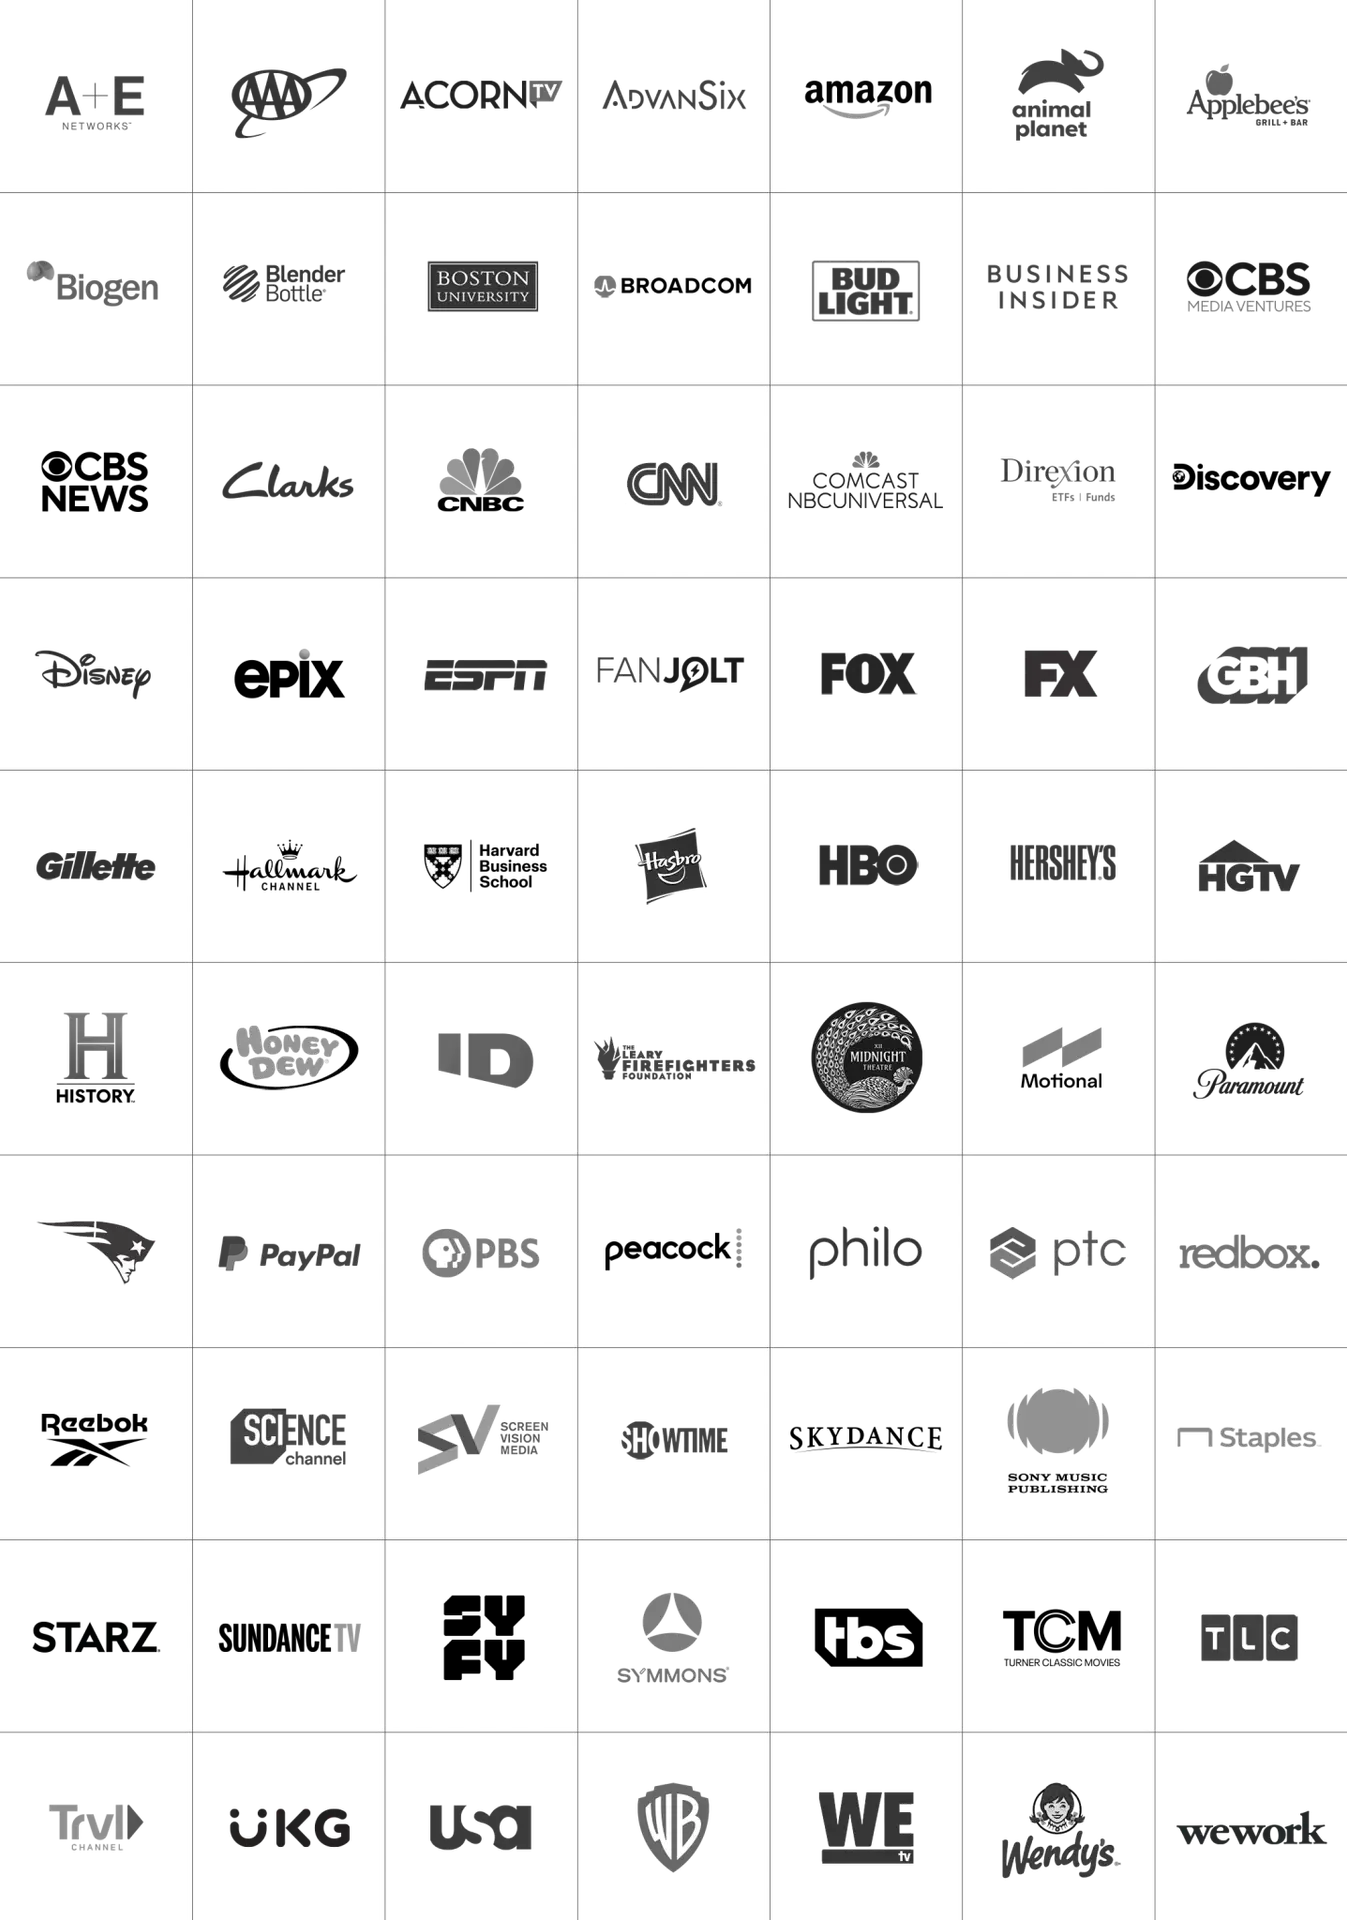 A black and white image of many different product logos.